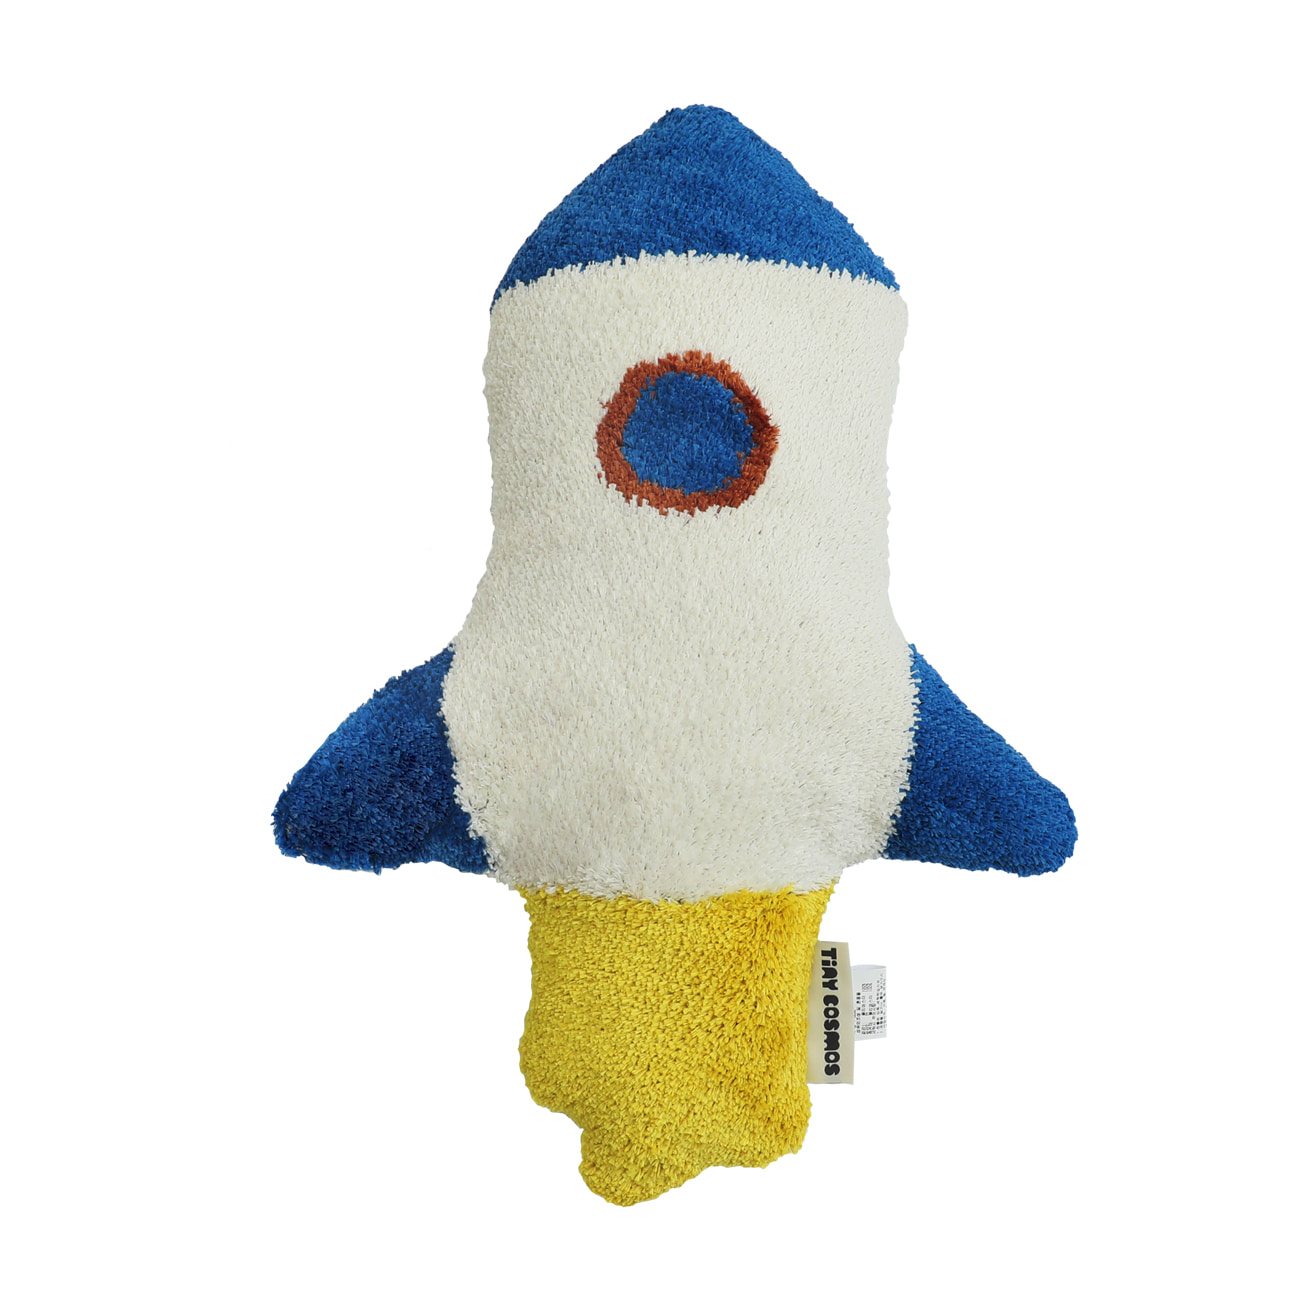 Rocket cushion 로켓 모양쿠션(SOLD OUT)